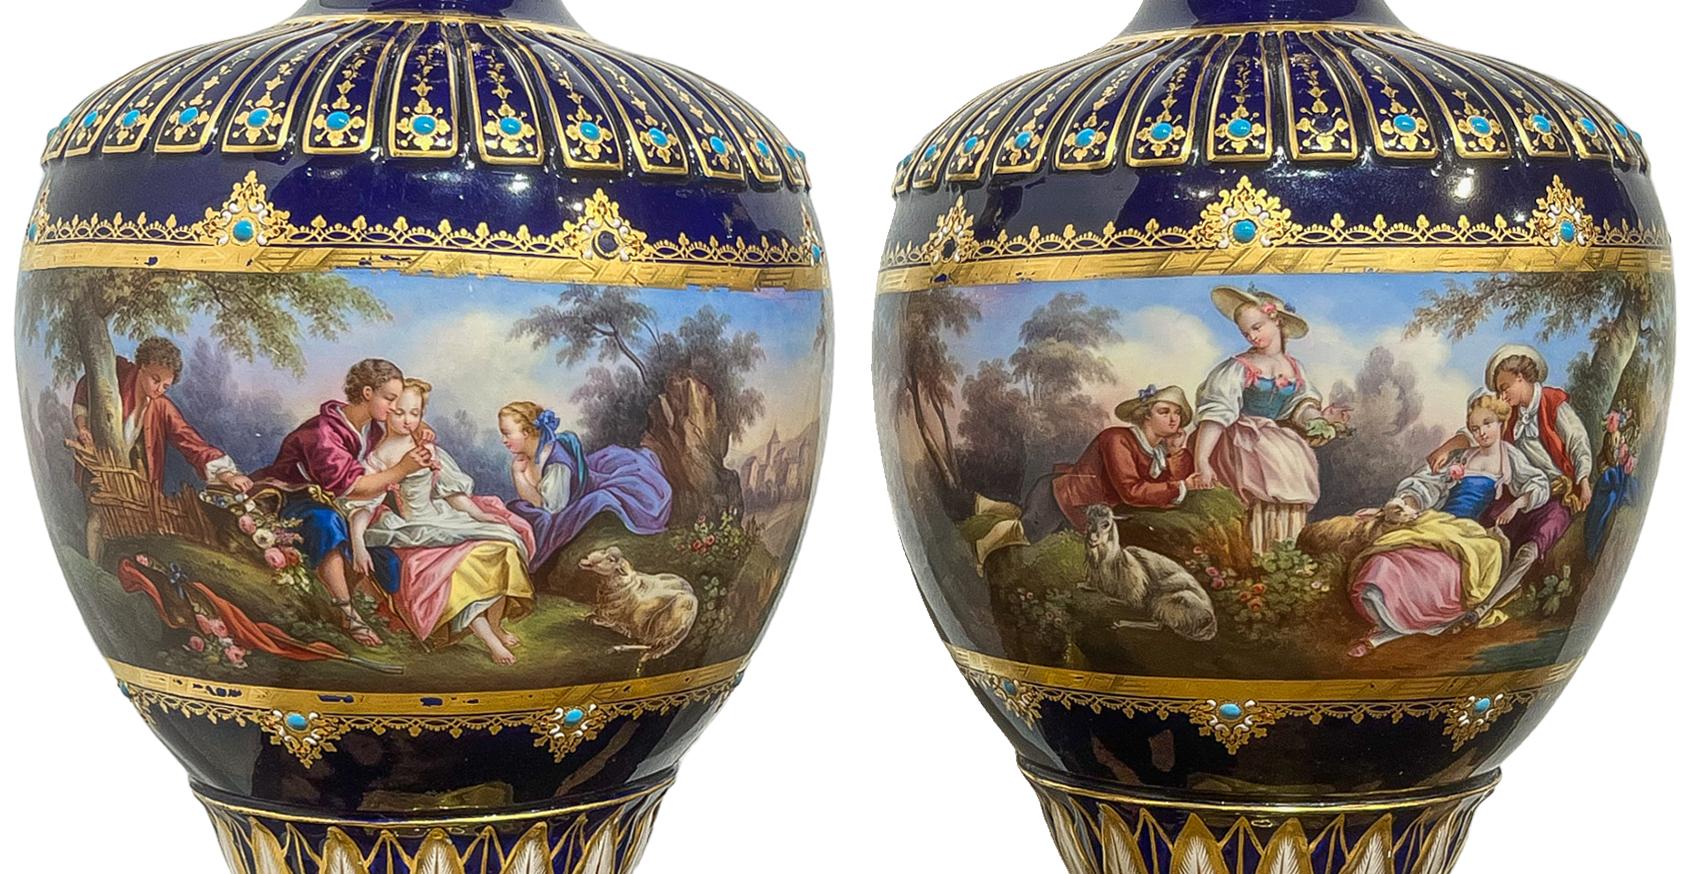 Blue Serves Pair of Jeweled Vases with Gilt Paint and Turquoise embellishments throughout. Incredibly ornate with gold painted details throughout. Both vases contain genre  scenes with focal points of figure groups relaxing in the forrest with lush